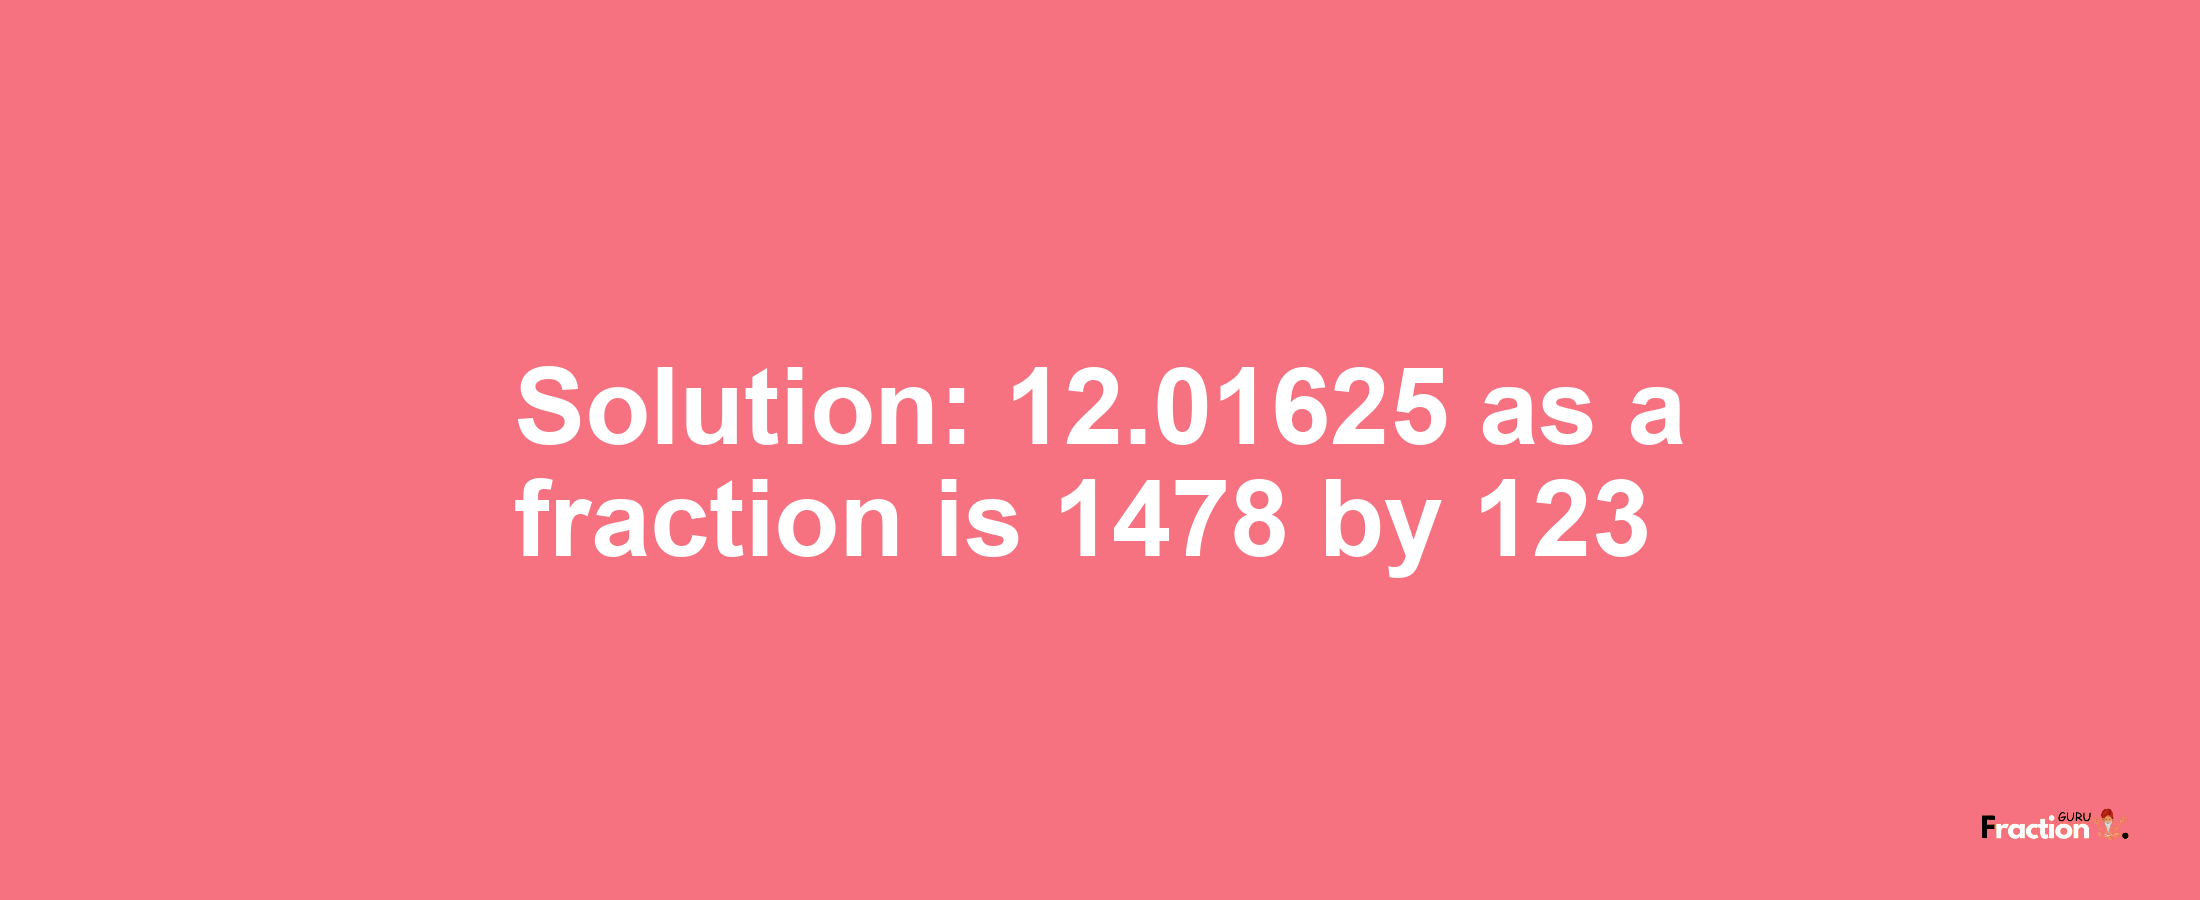 Solution:12.01625 as a fraction is 1478/123